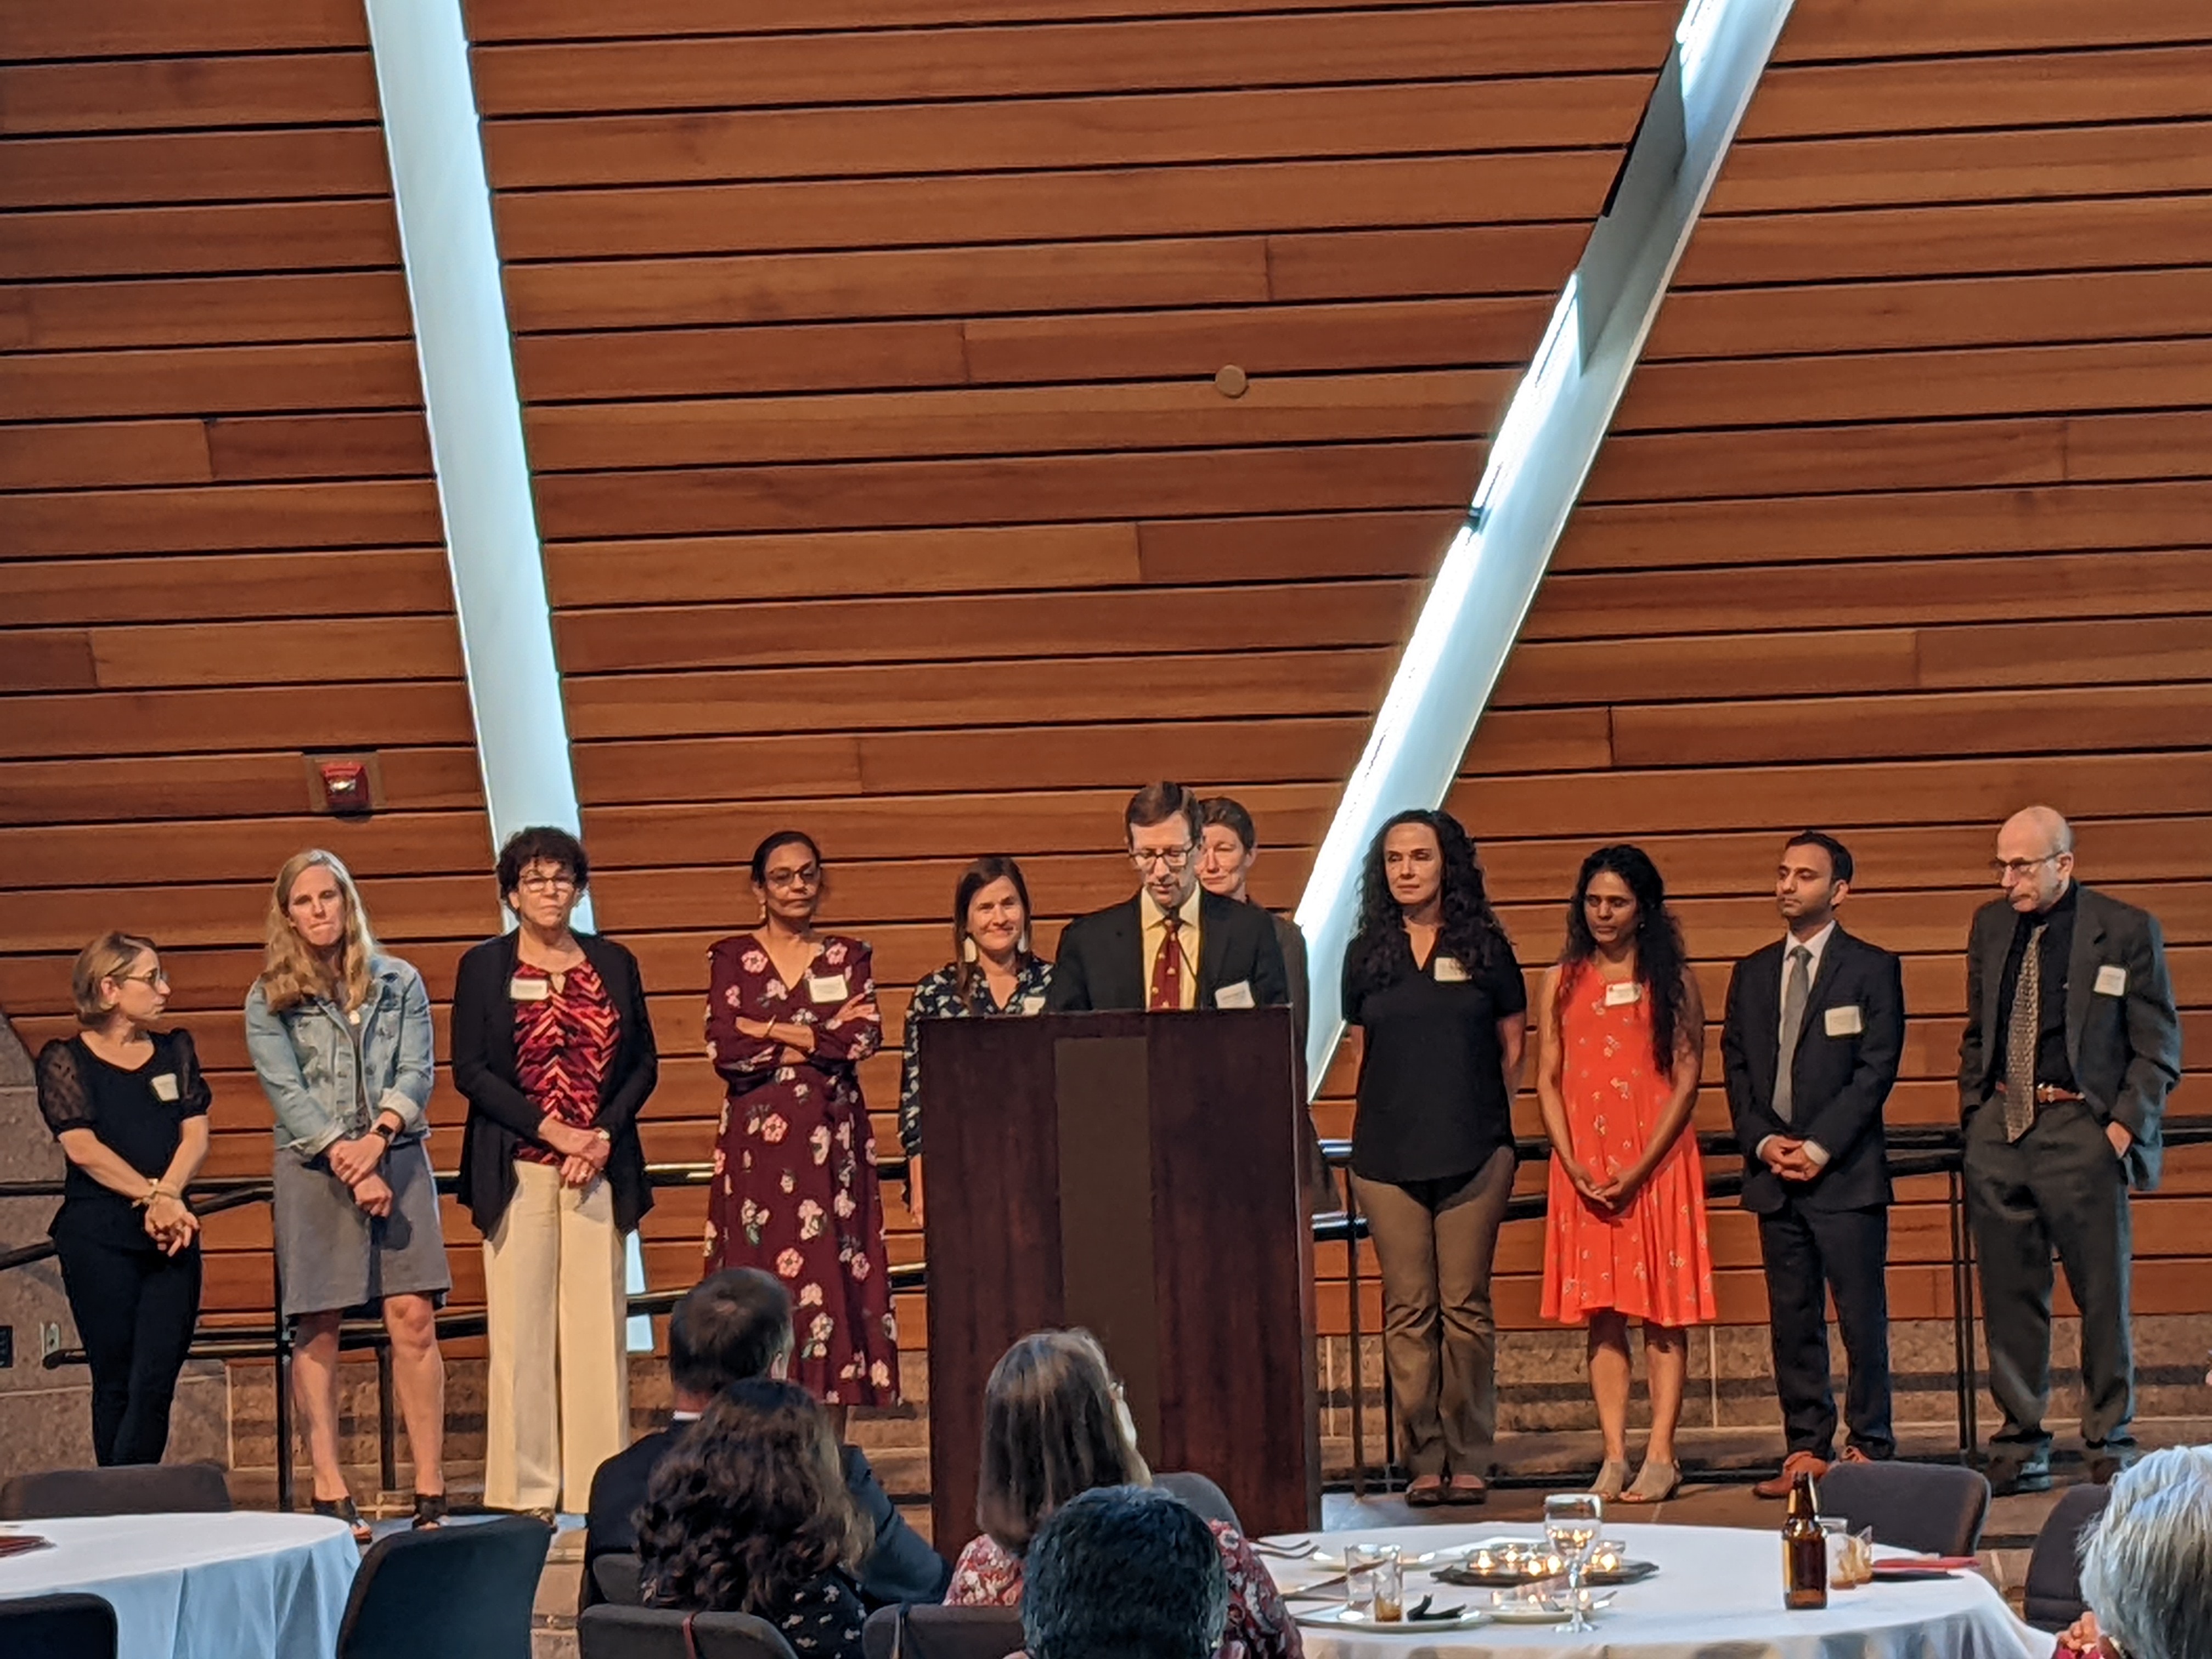 Department Head Dr. Joseph Neglia presenting promoted faculty at the Medical School Promotion & Tenure Reception on June 22, 2022.